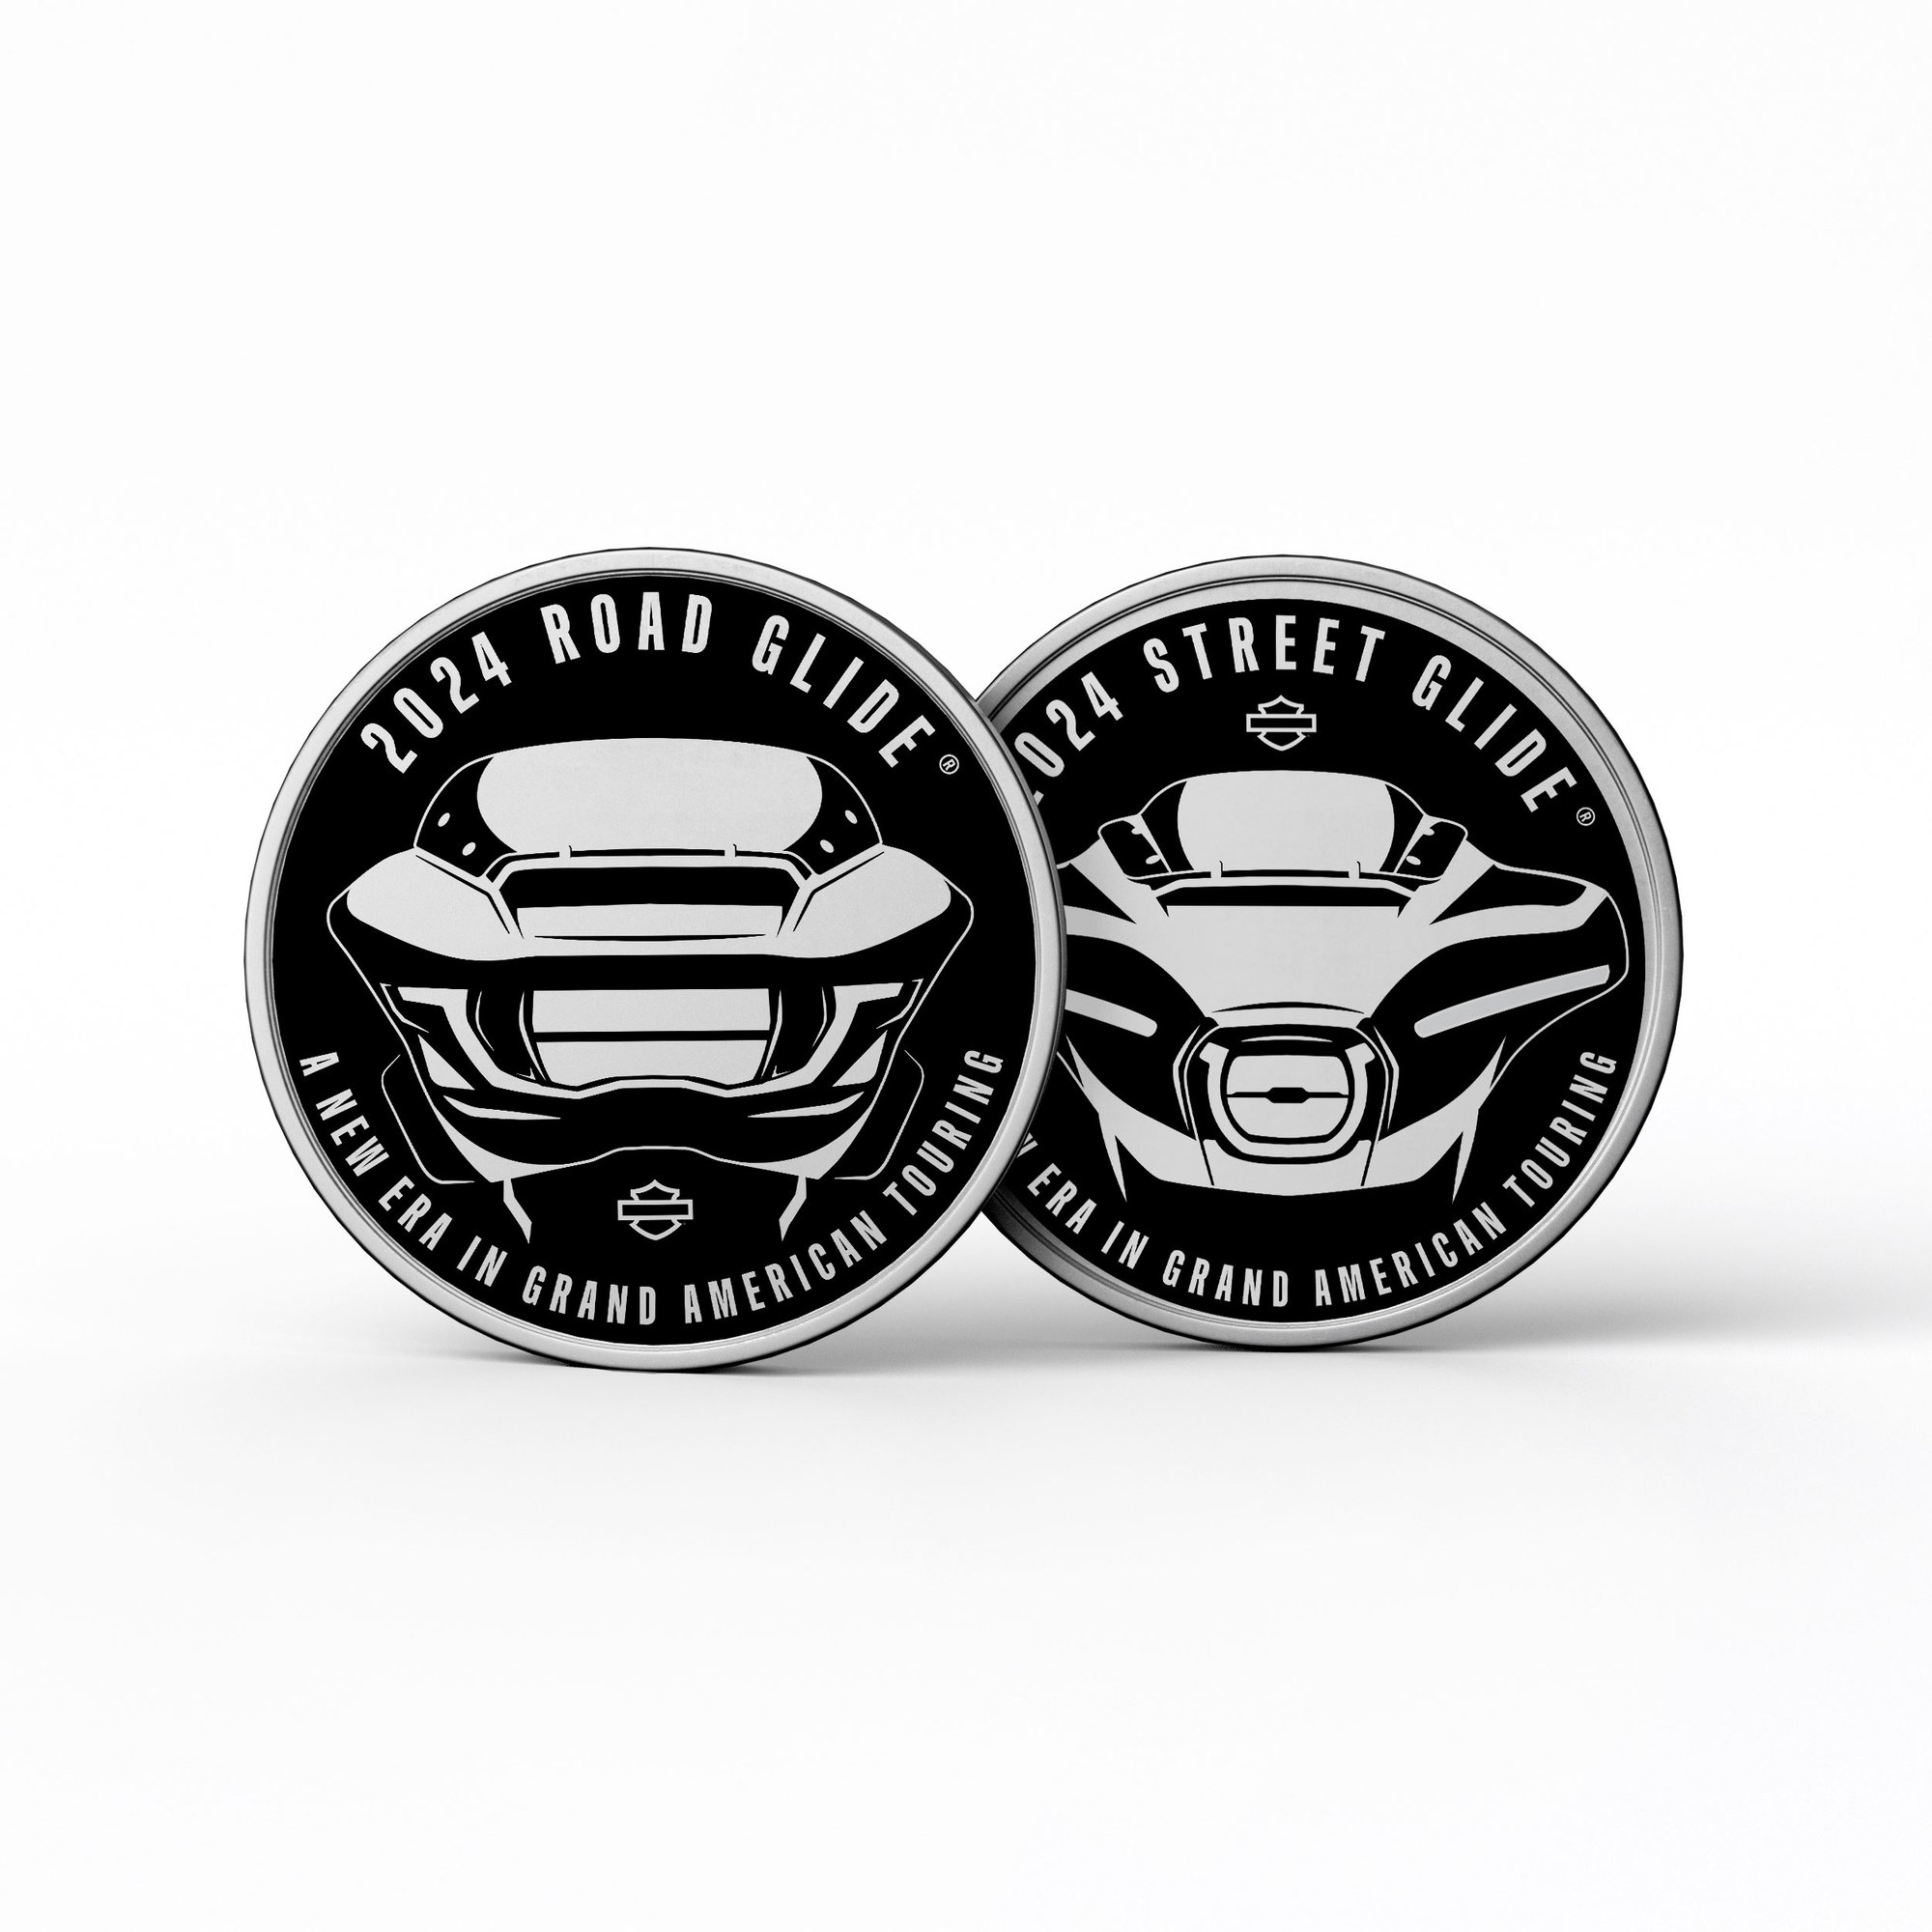 test ride incentive challenge coin image-1